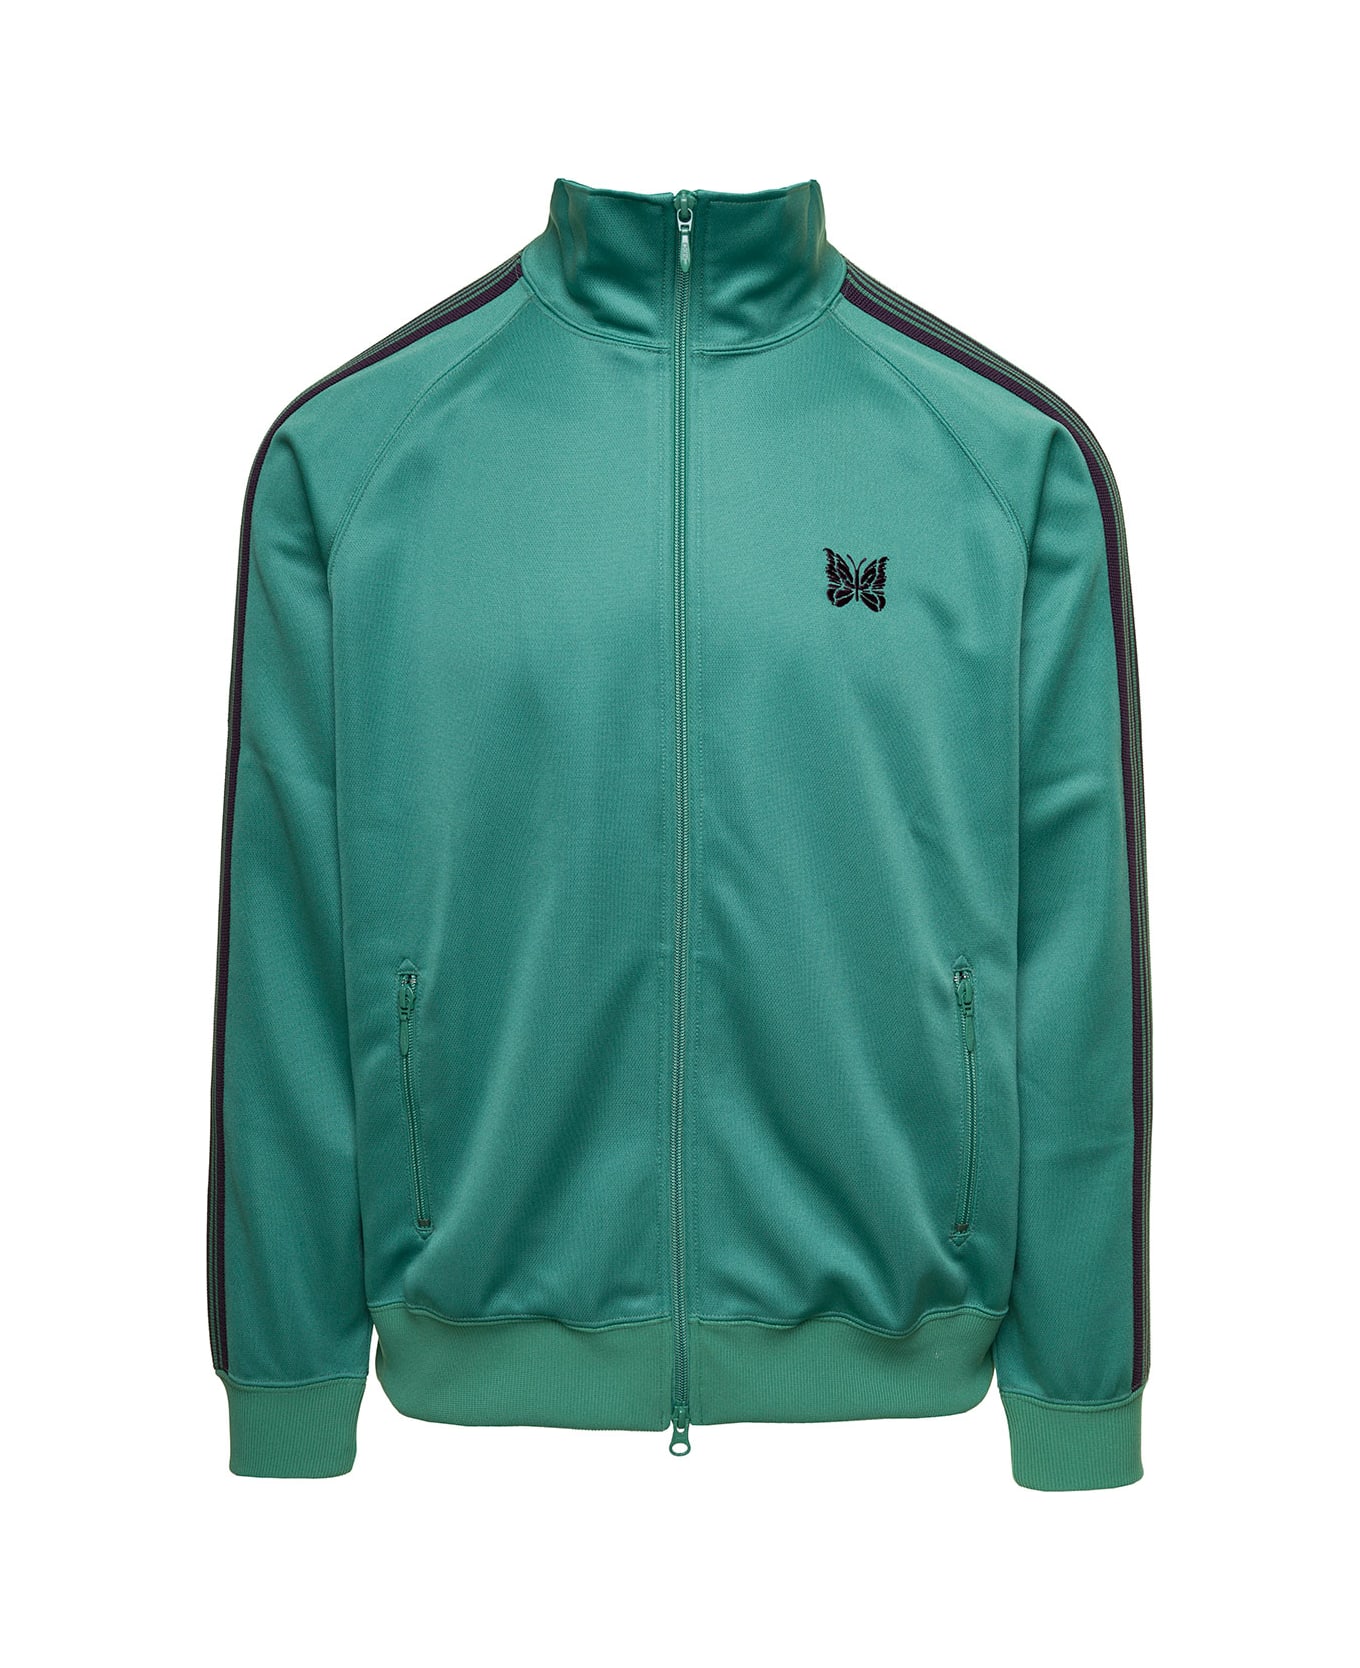 Needles Green High-neck Sweatshirt With Logo Embroidery In Tech Fabric Man - Green